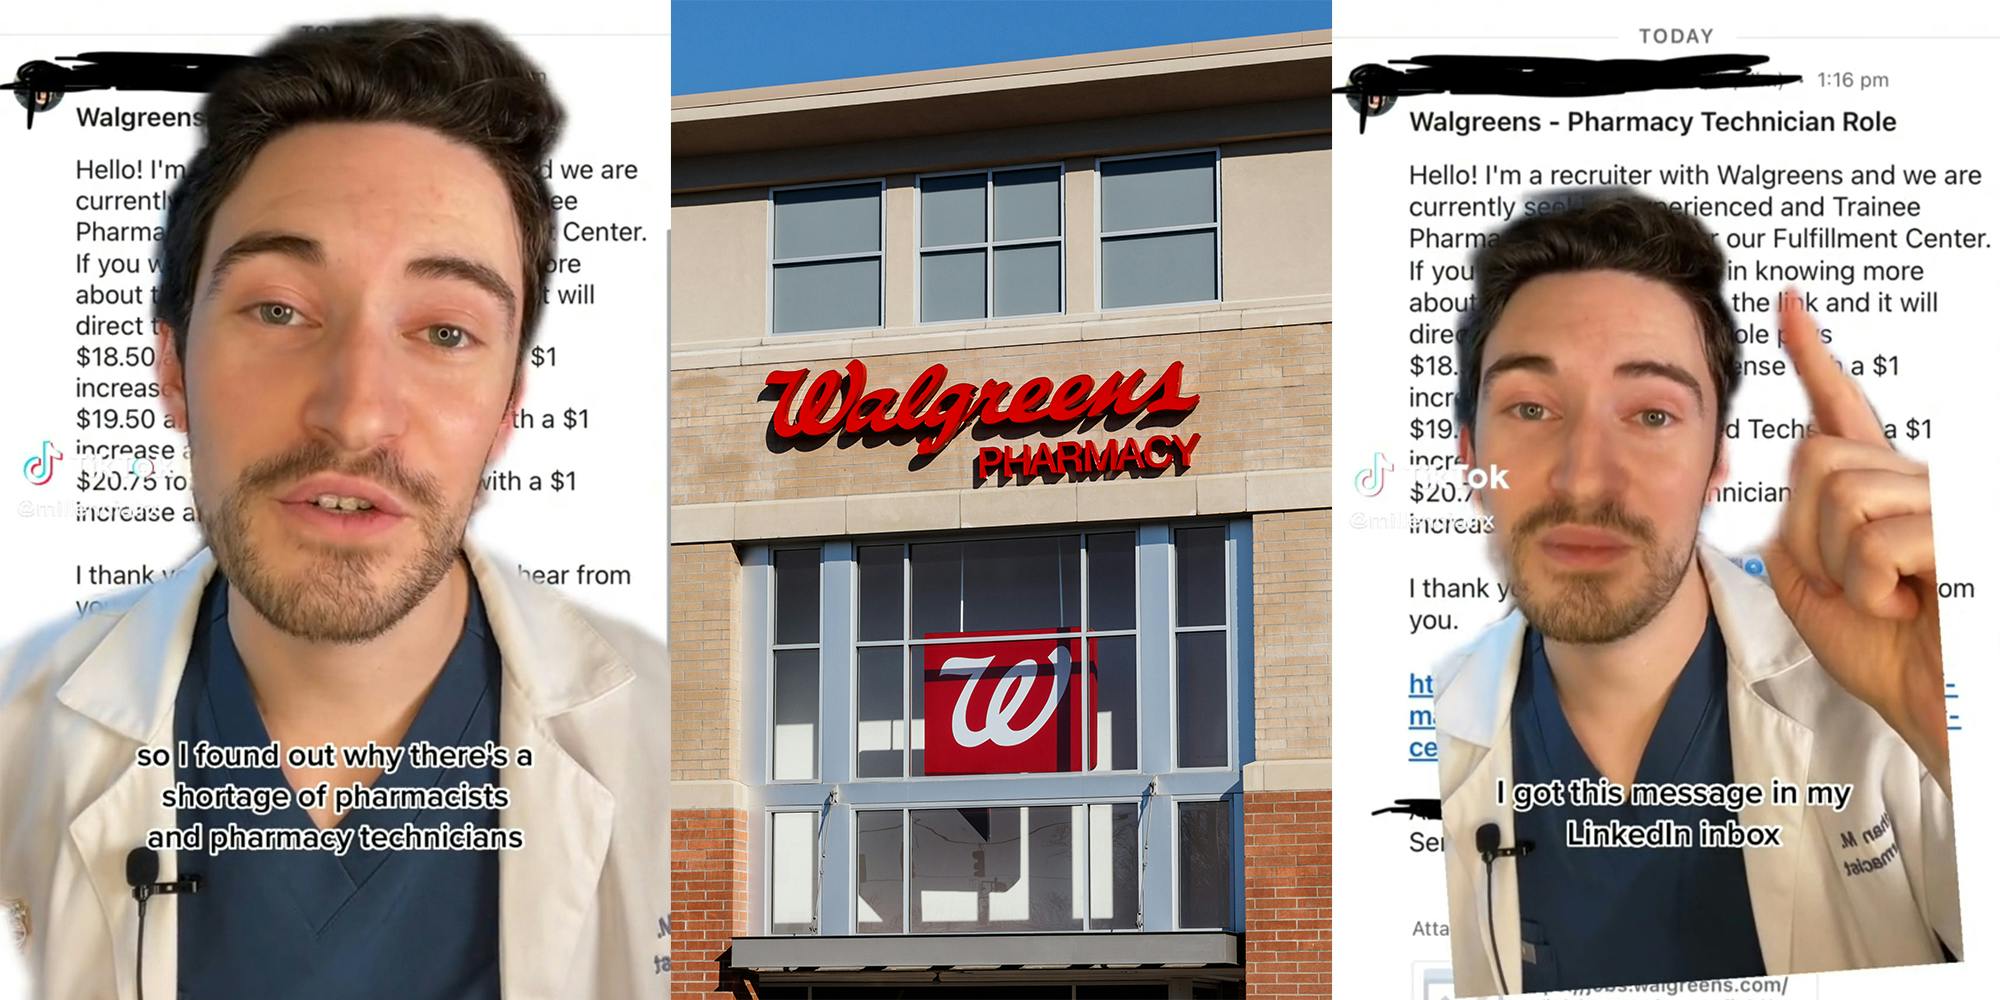 Pharmacist calls out Walgreens for offering pharmacist technicians $20/hr